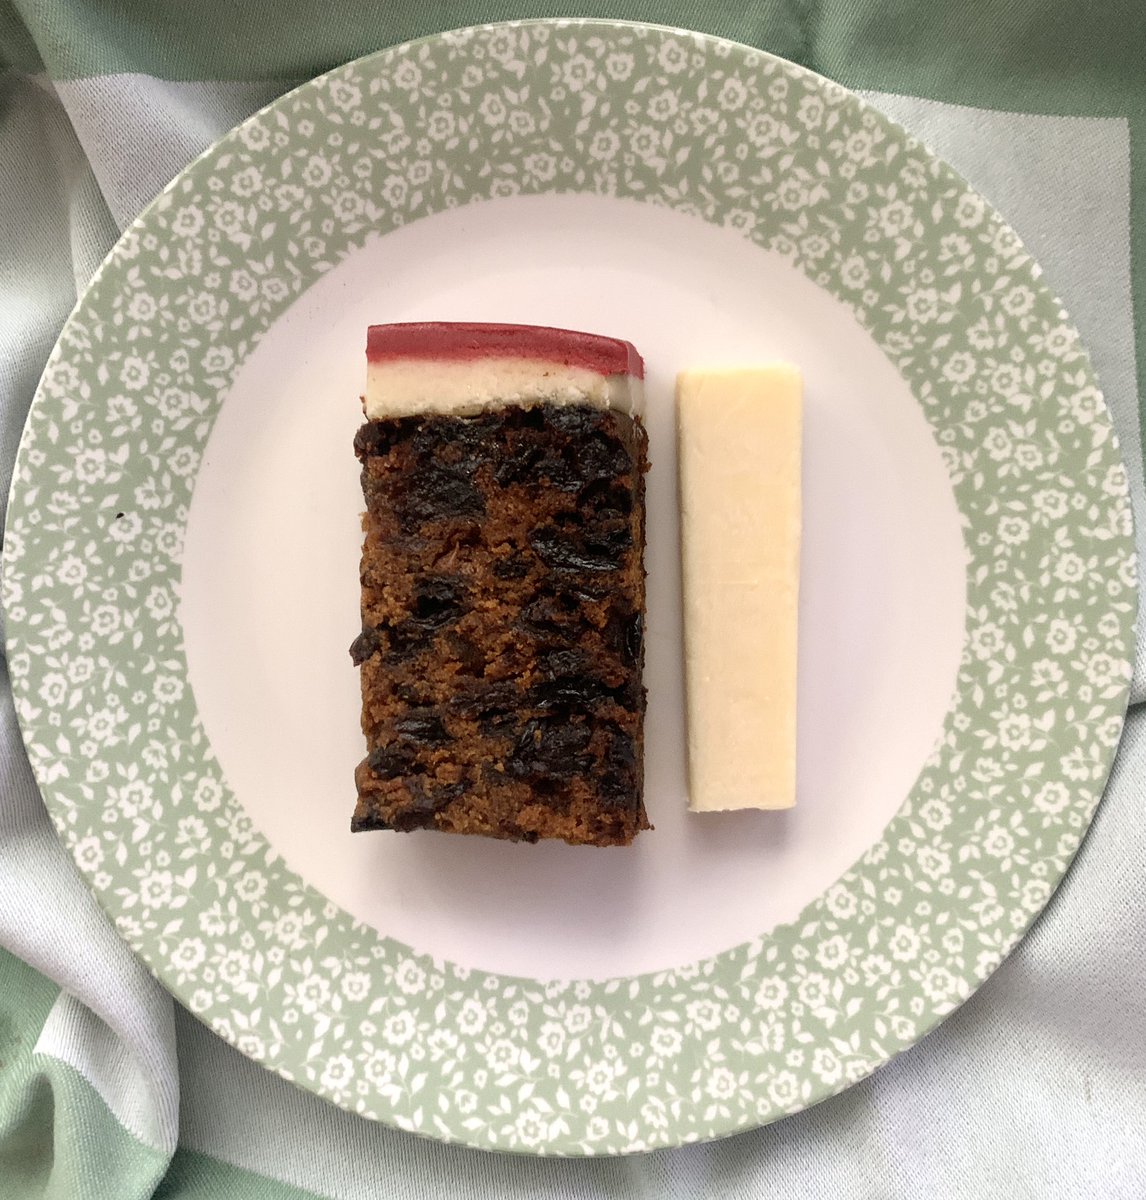 The Christmas cake has finally been cut into … served the northern way with cheese 🎄#fruitcake #christmascake